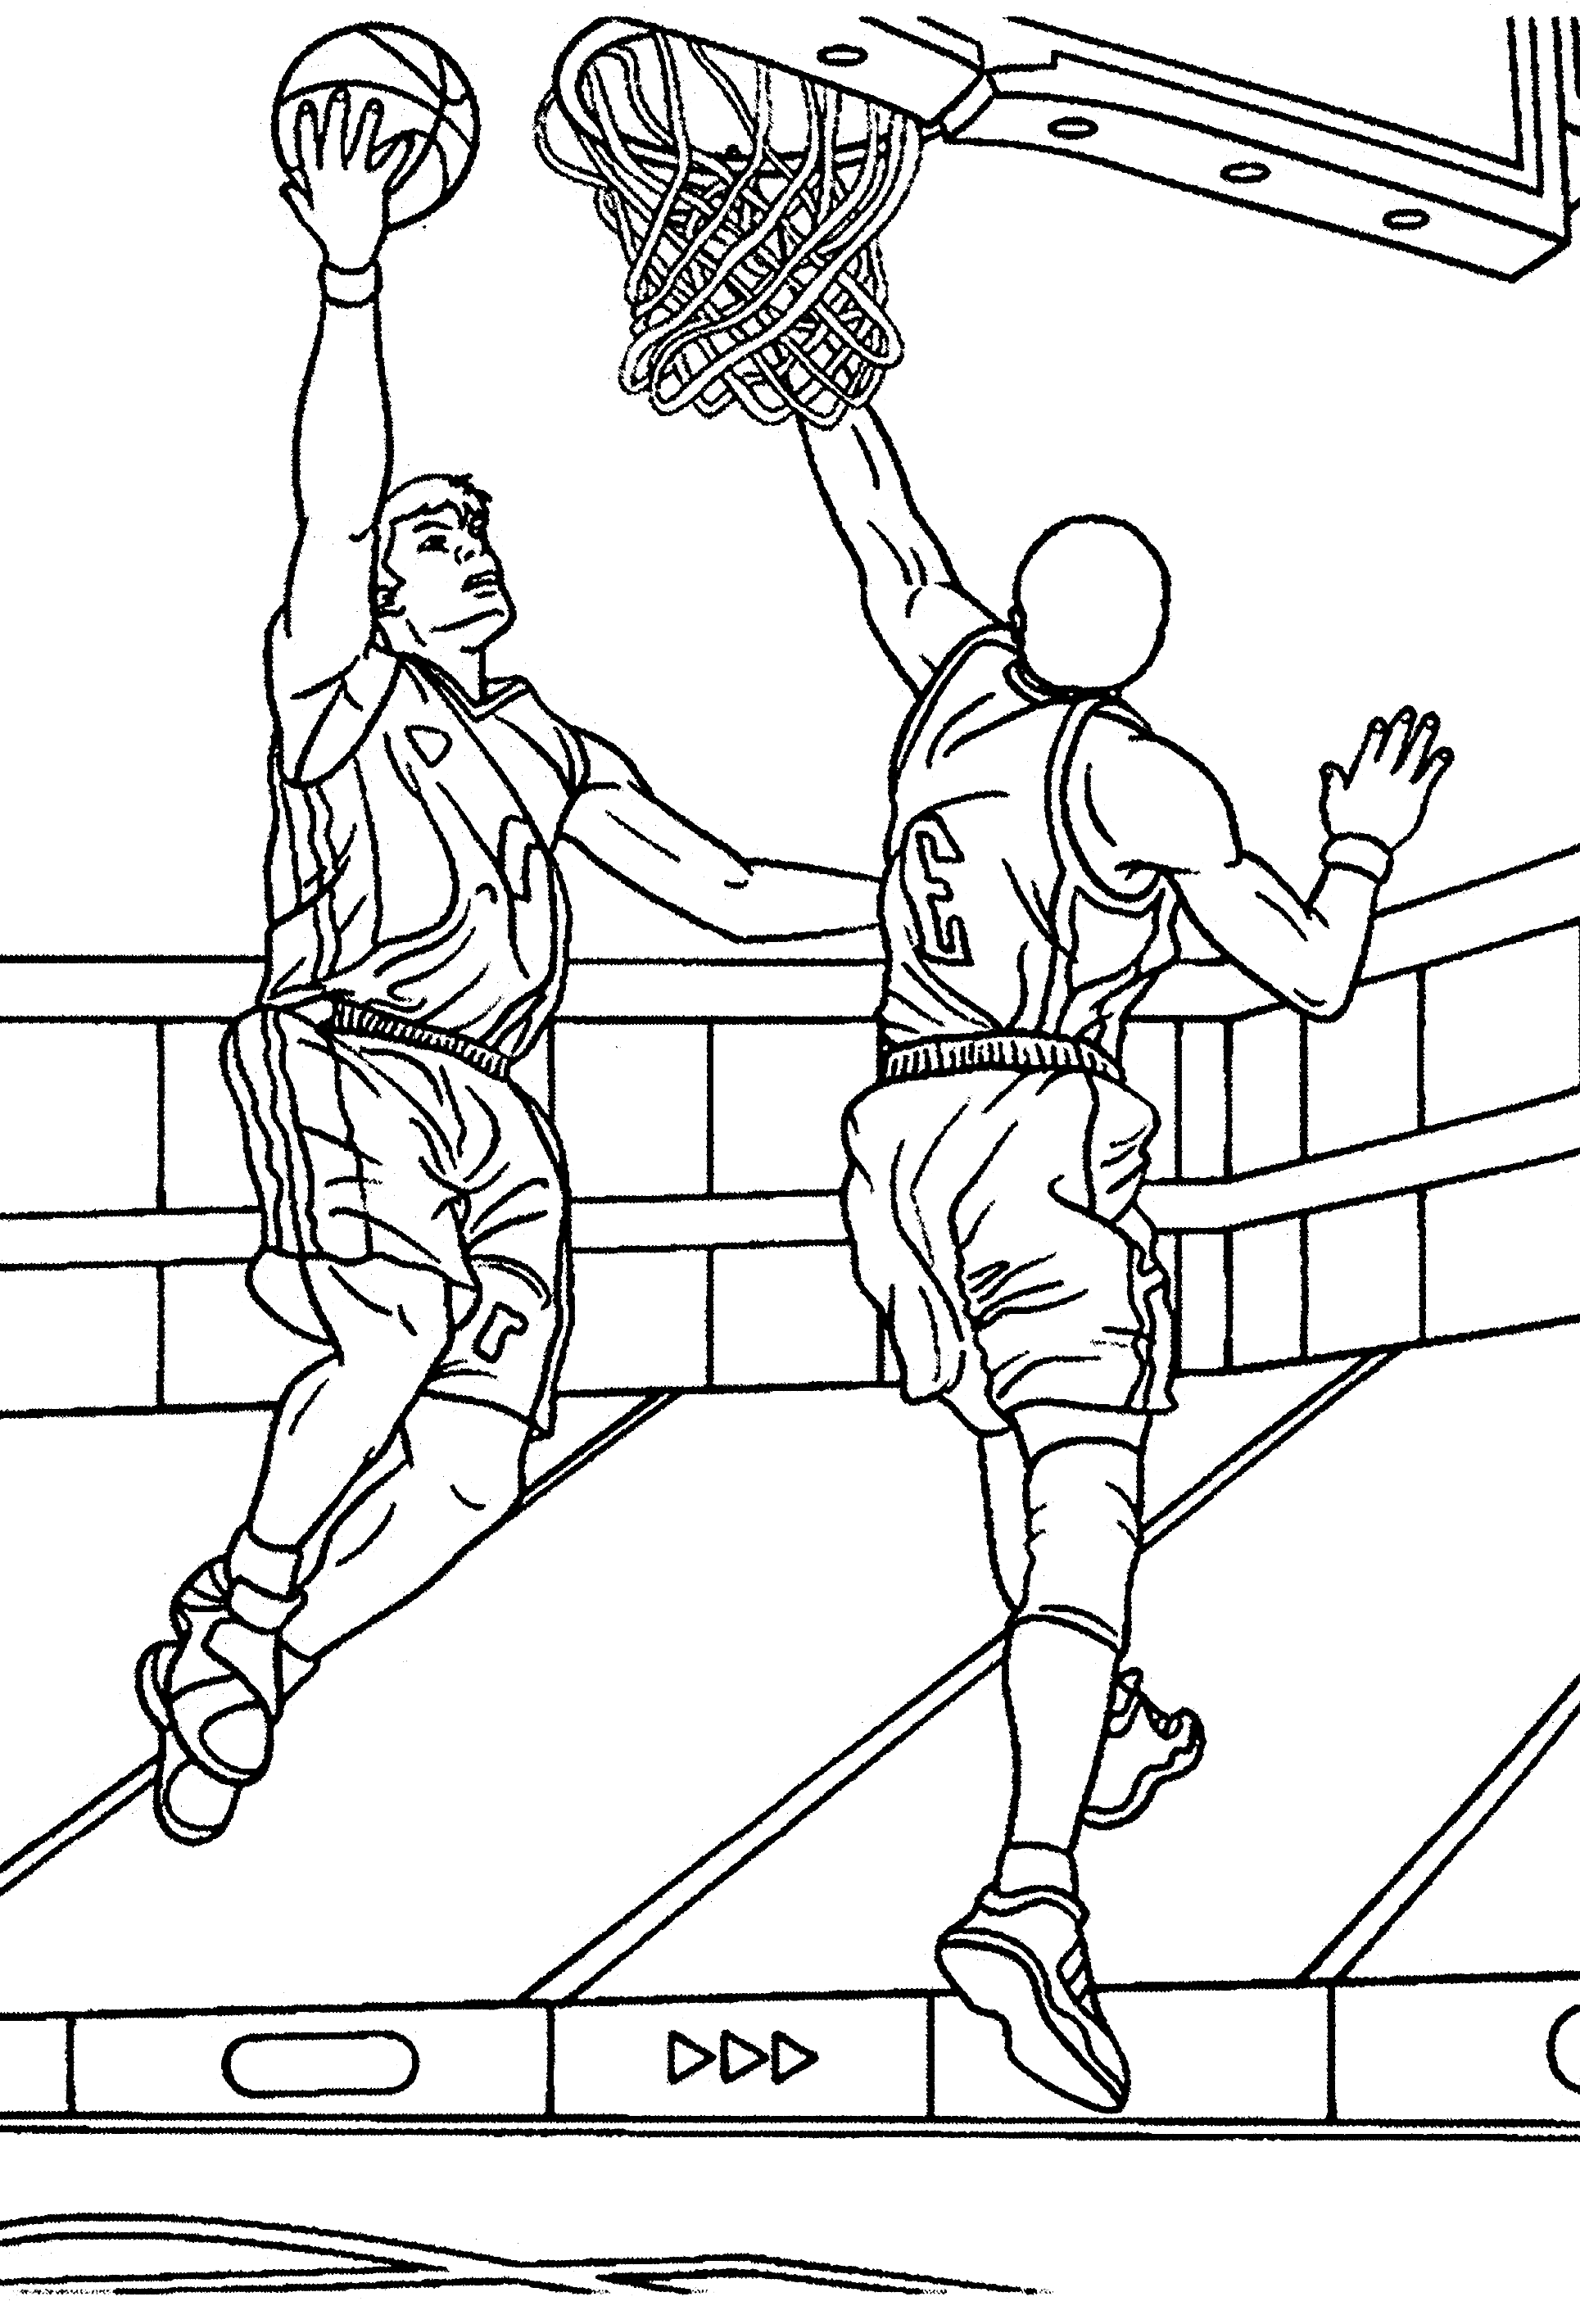 Basketball Sport Coloring Page